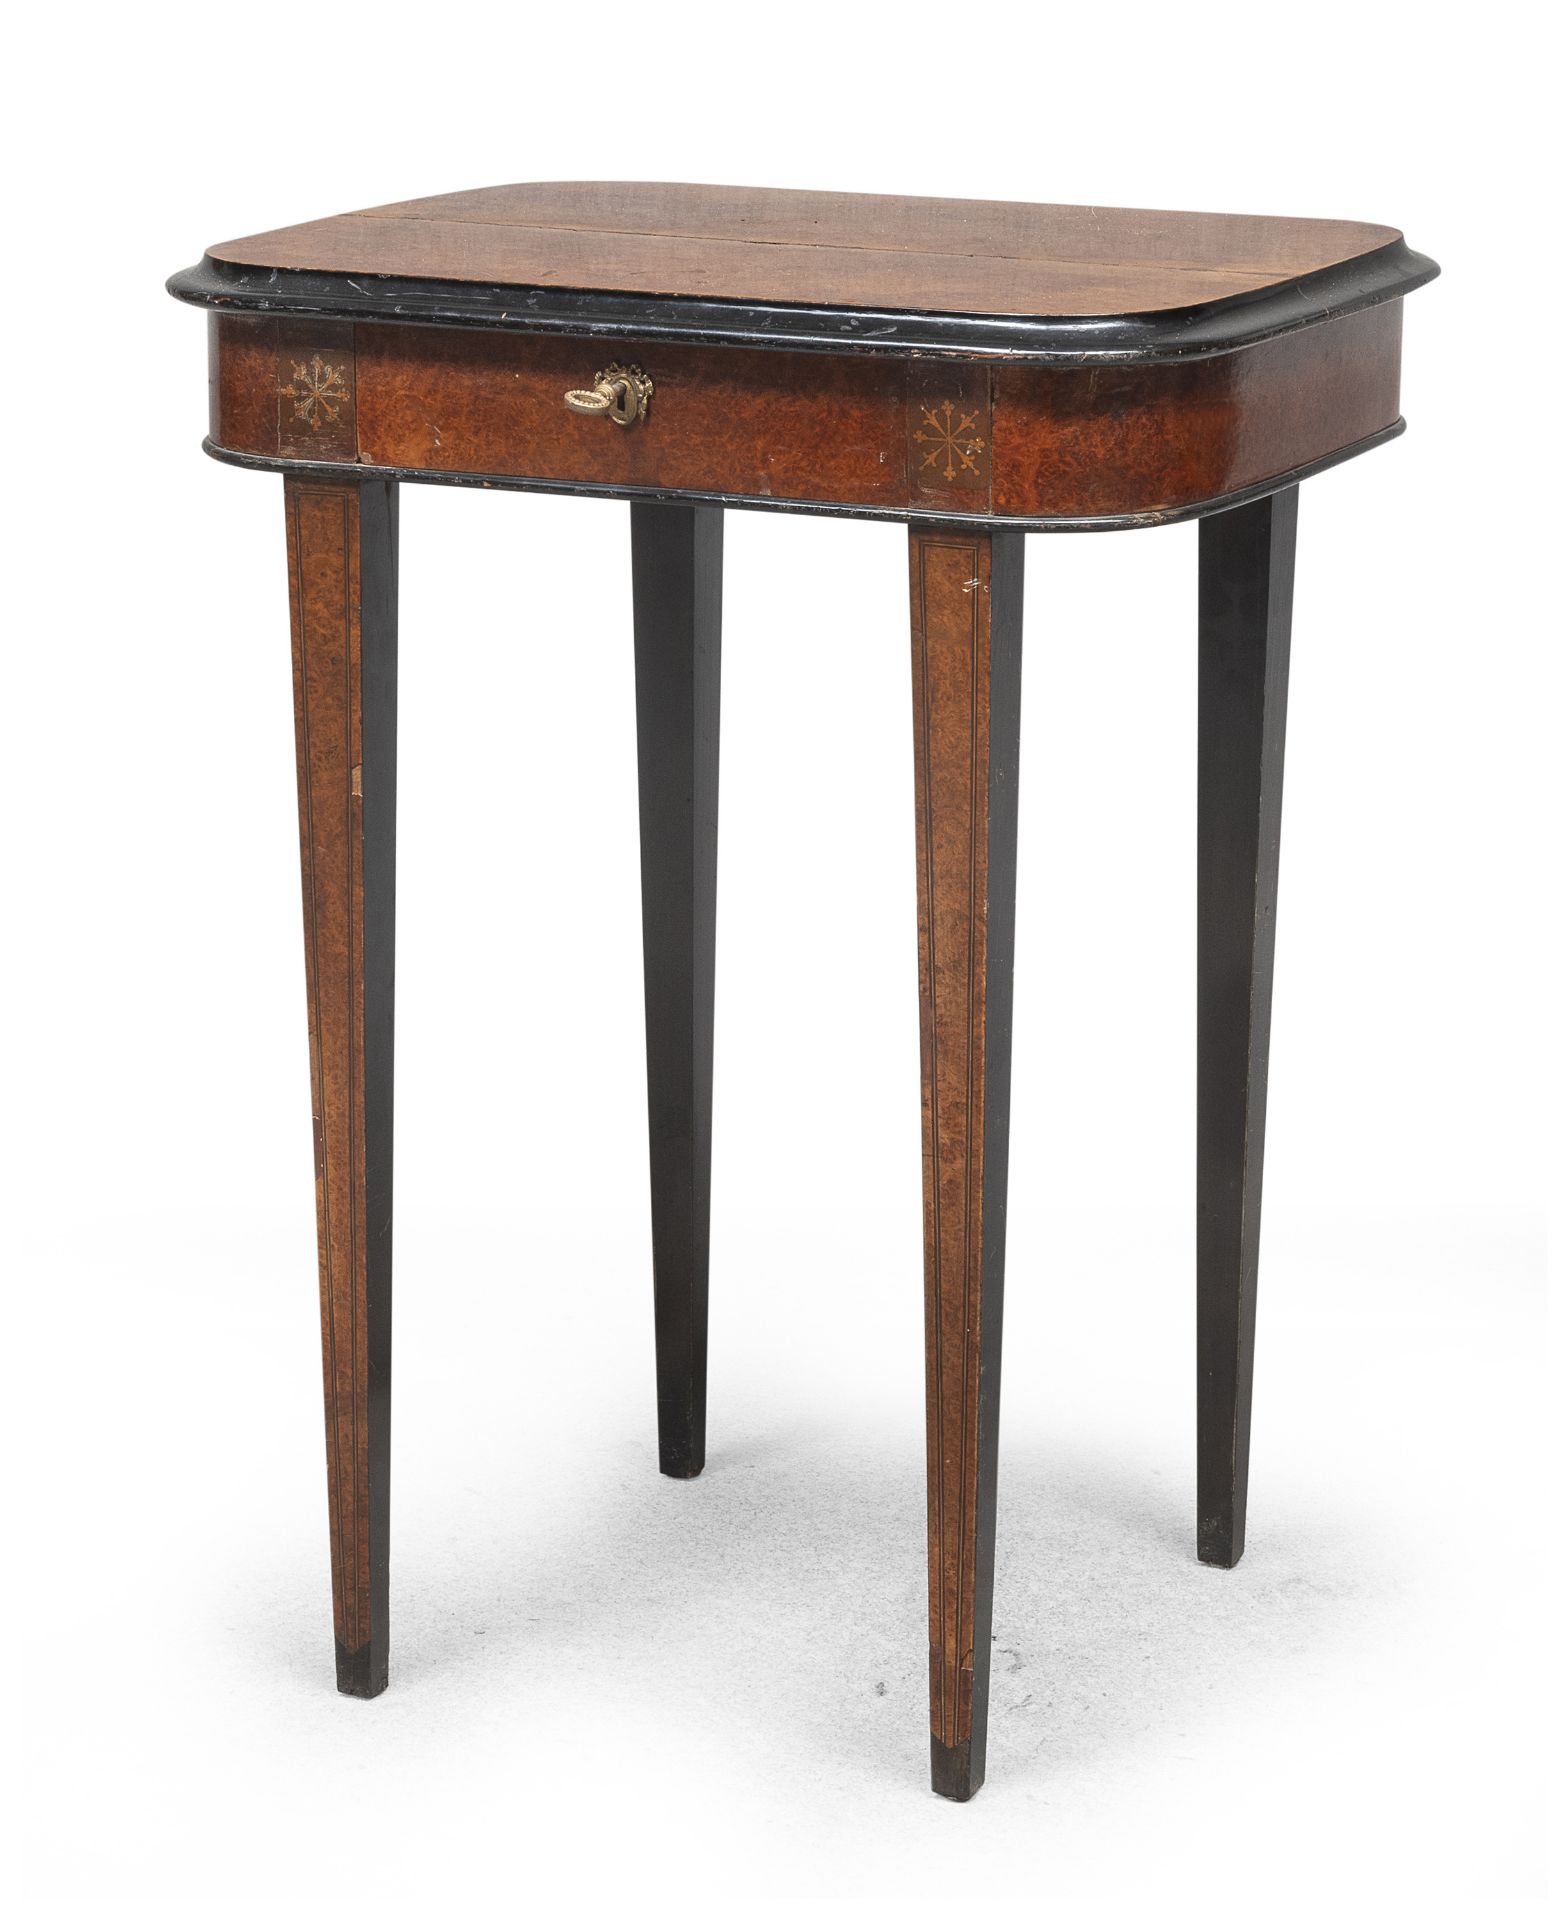 TUJA BRIAR TABLE EARLY 20TH CENTURY